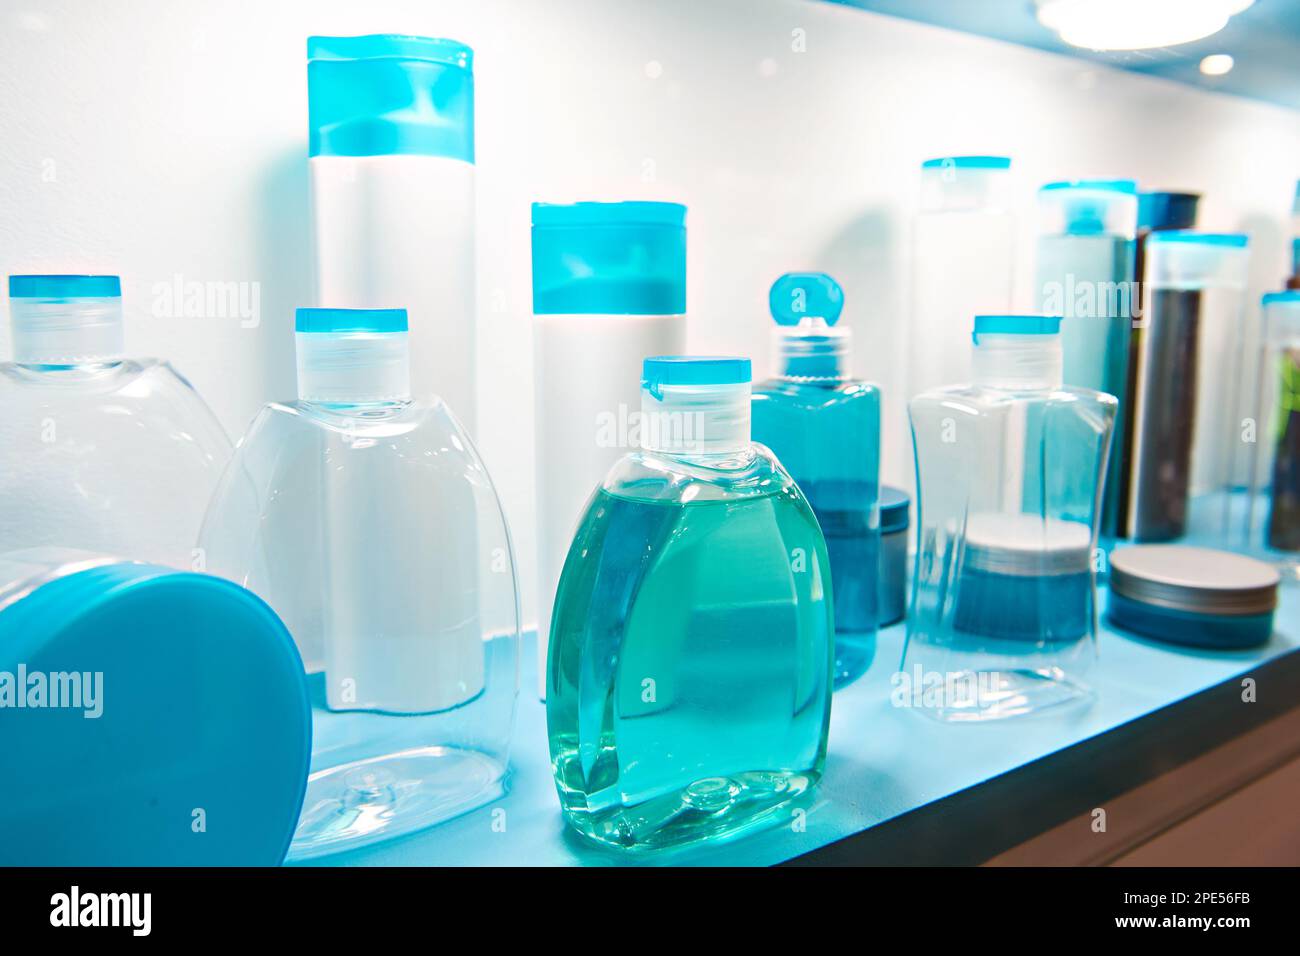 Showcase shop with plastic bottles and jars cosmetic and shampoo Stock Photo